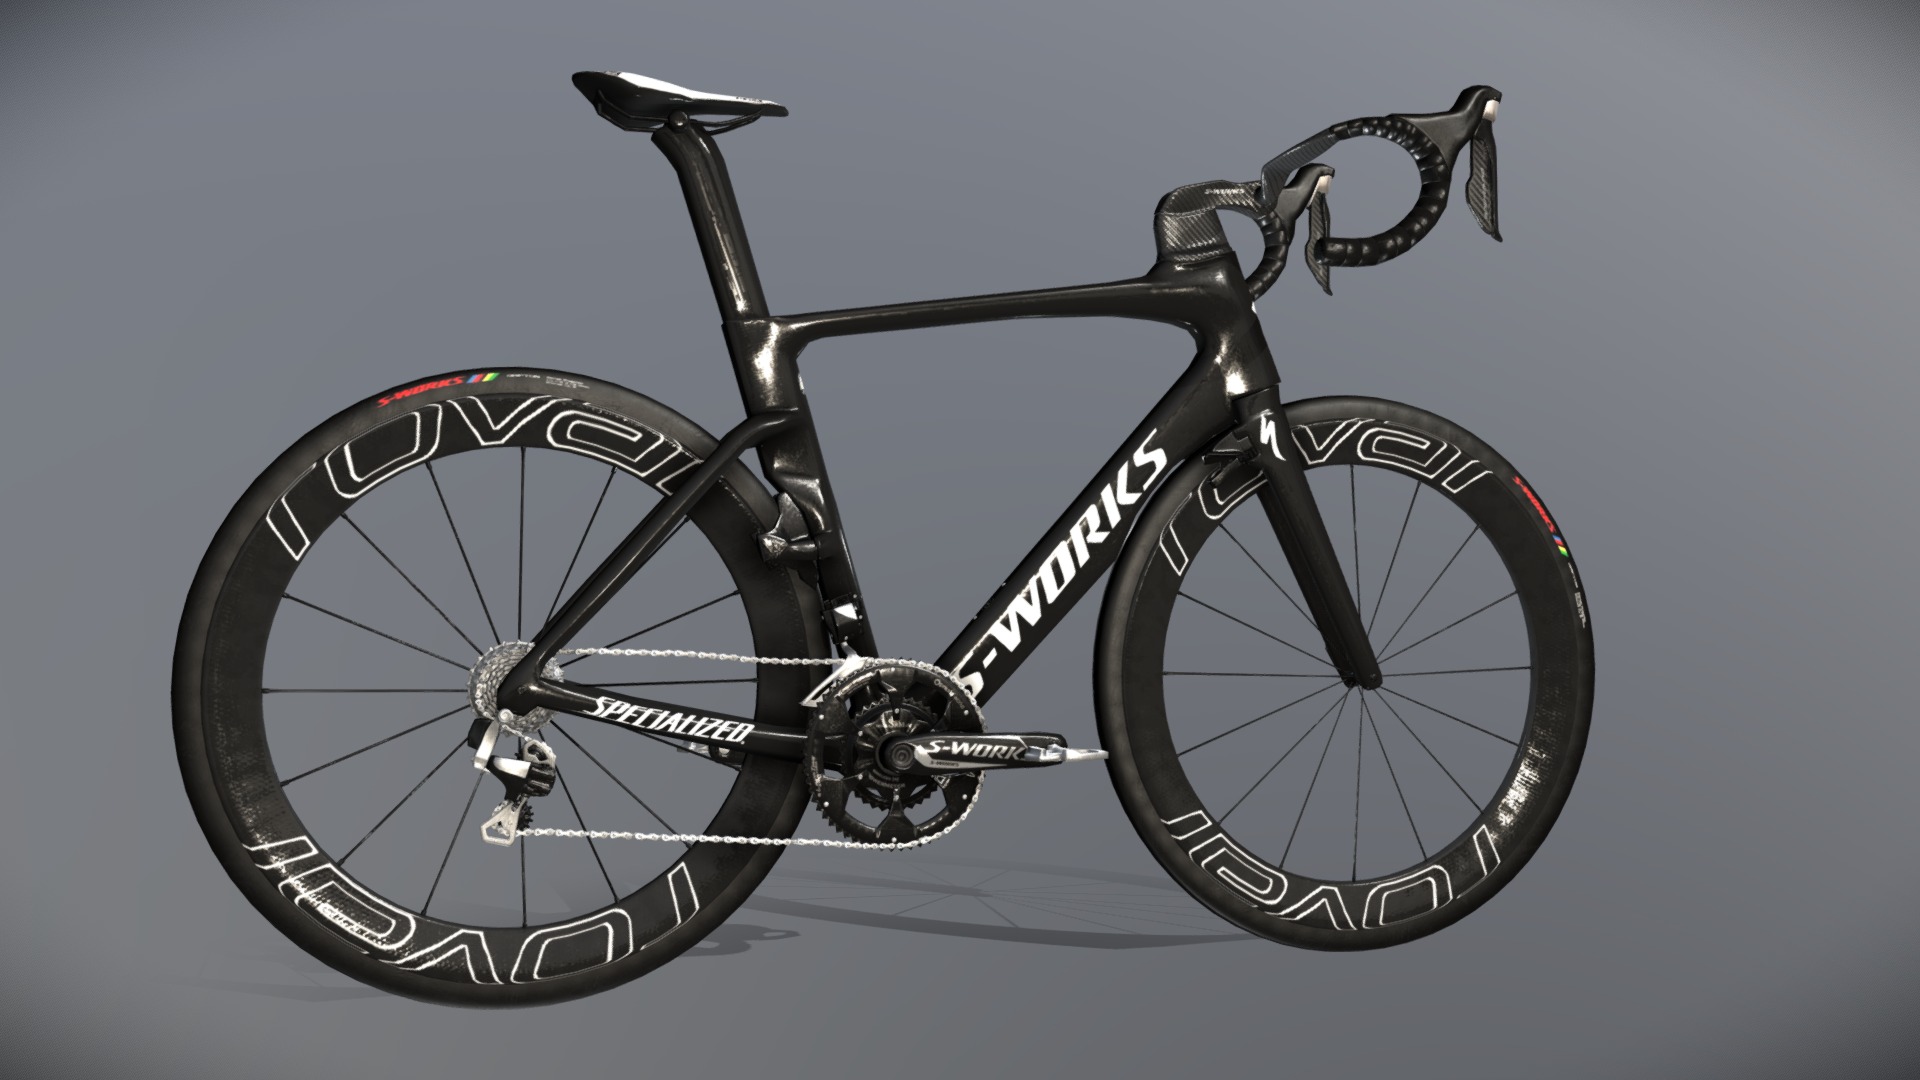 3D model S-Works Venge ViAS Di2 low_poly - This is a 3D model of the S-Works Venge ViAS Di2 low_poly. The 3D model is about a black and white bicycle.